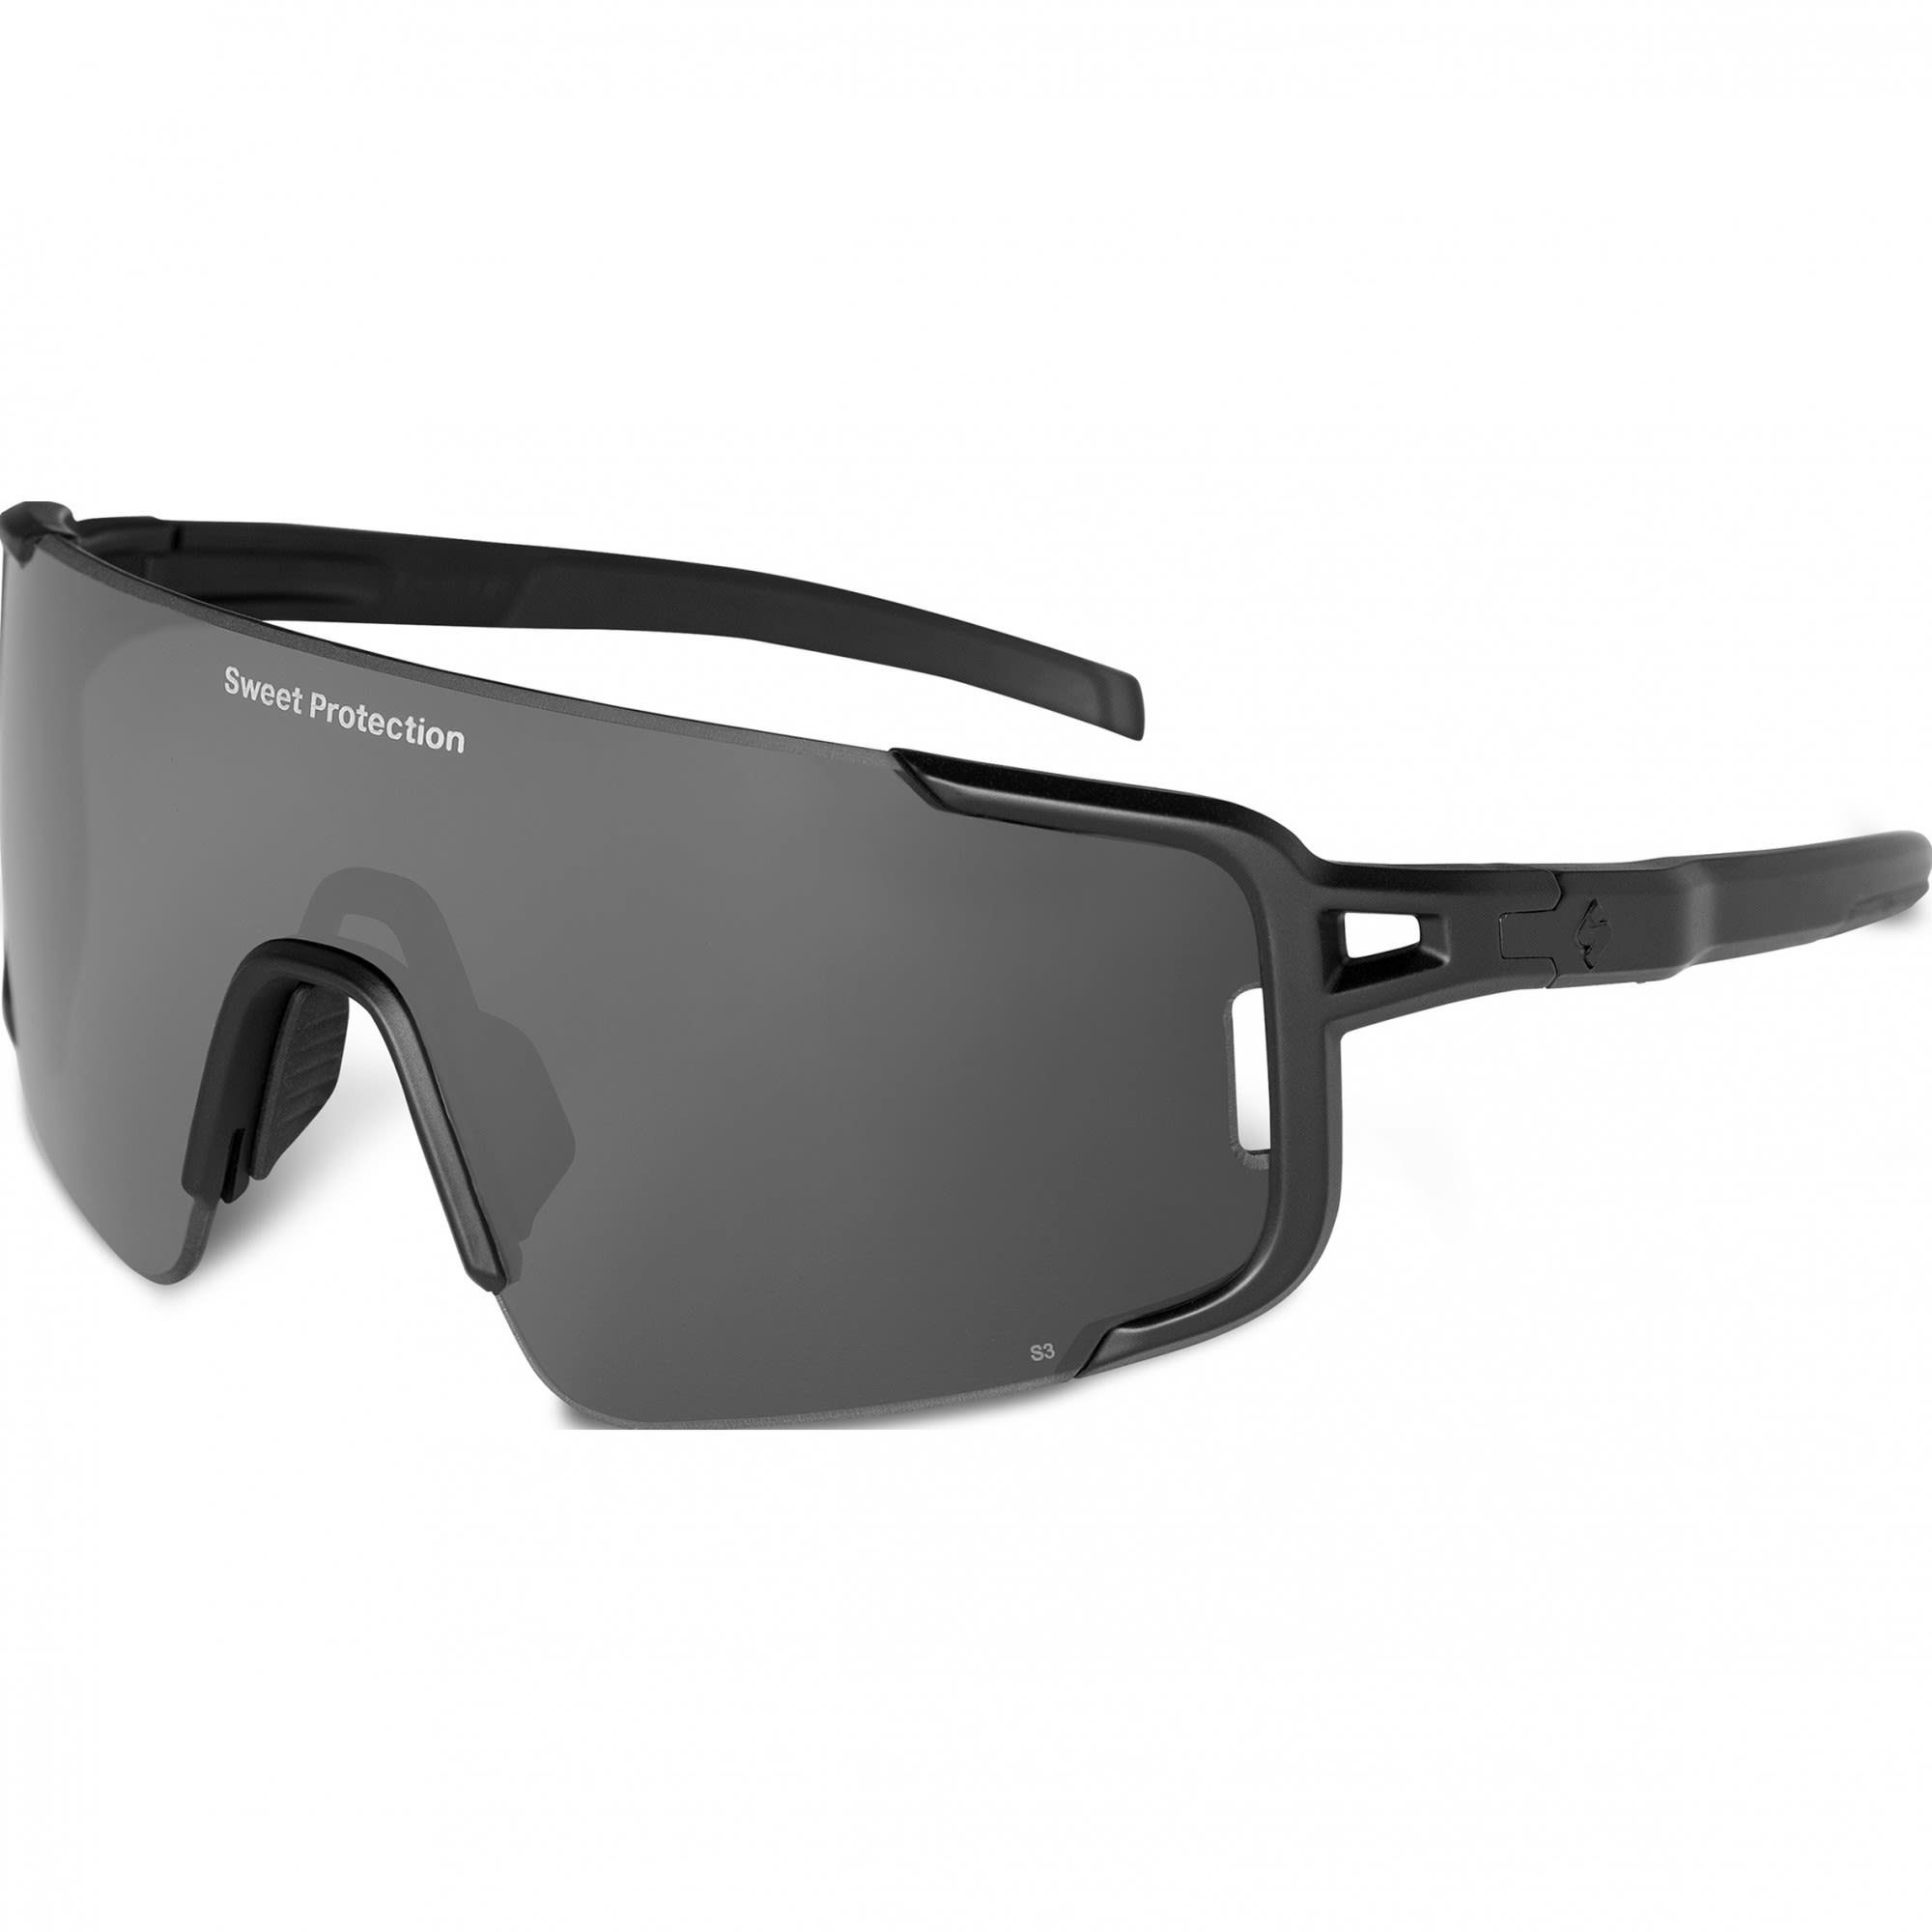 Sweet Protection Fahrradbrille Sweet Protection Ronin Polarized Accessoires